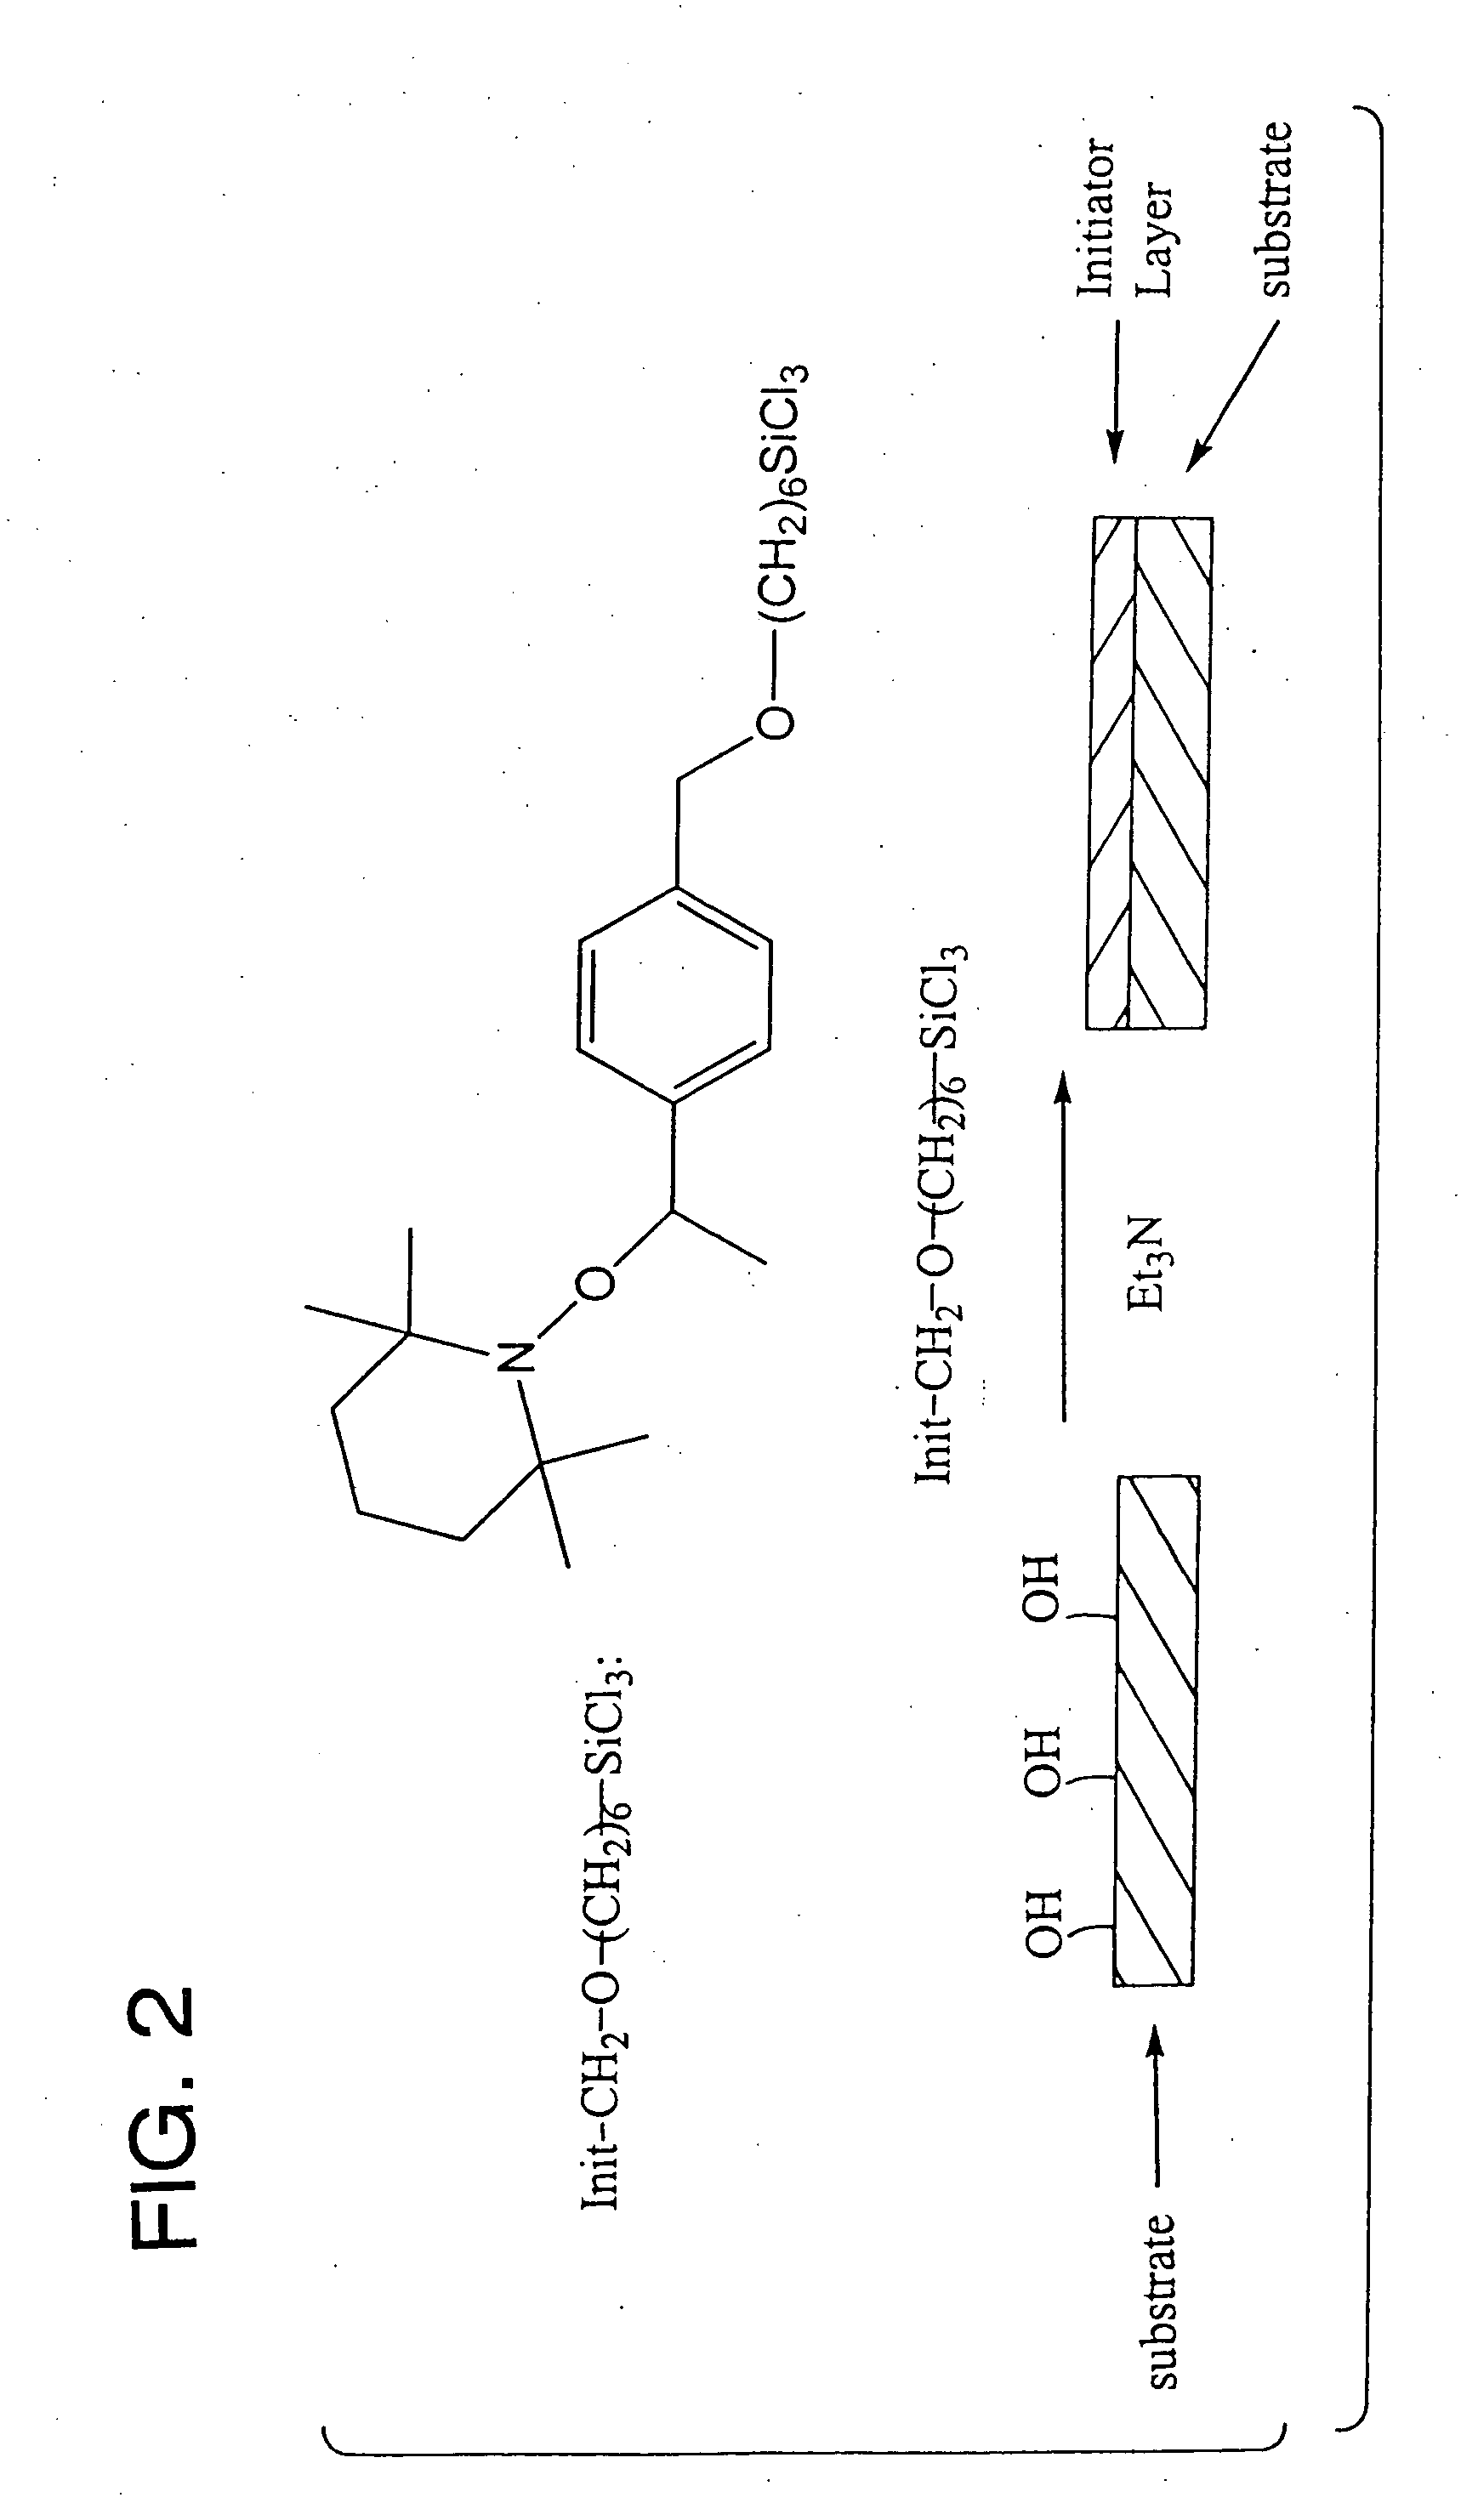 Polymer brushes for immobilizing molecules to a surface and having water-soluble or water-dispersible segments therein and probes bonded thereto